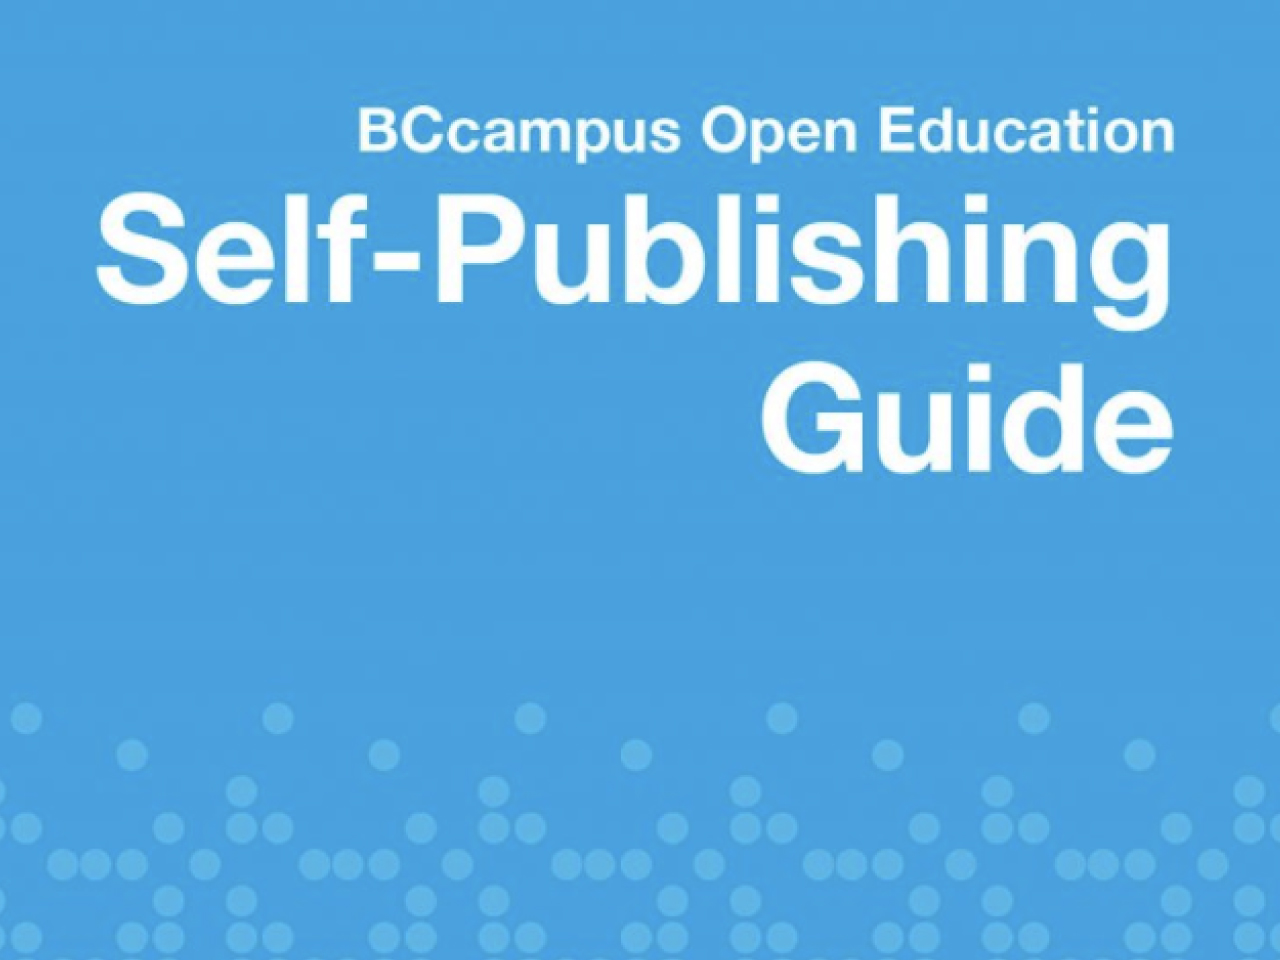 Self-publishing guide : a BCcampus Open Education reference for writing and self-publishing an open textbook